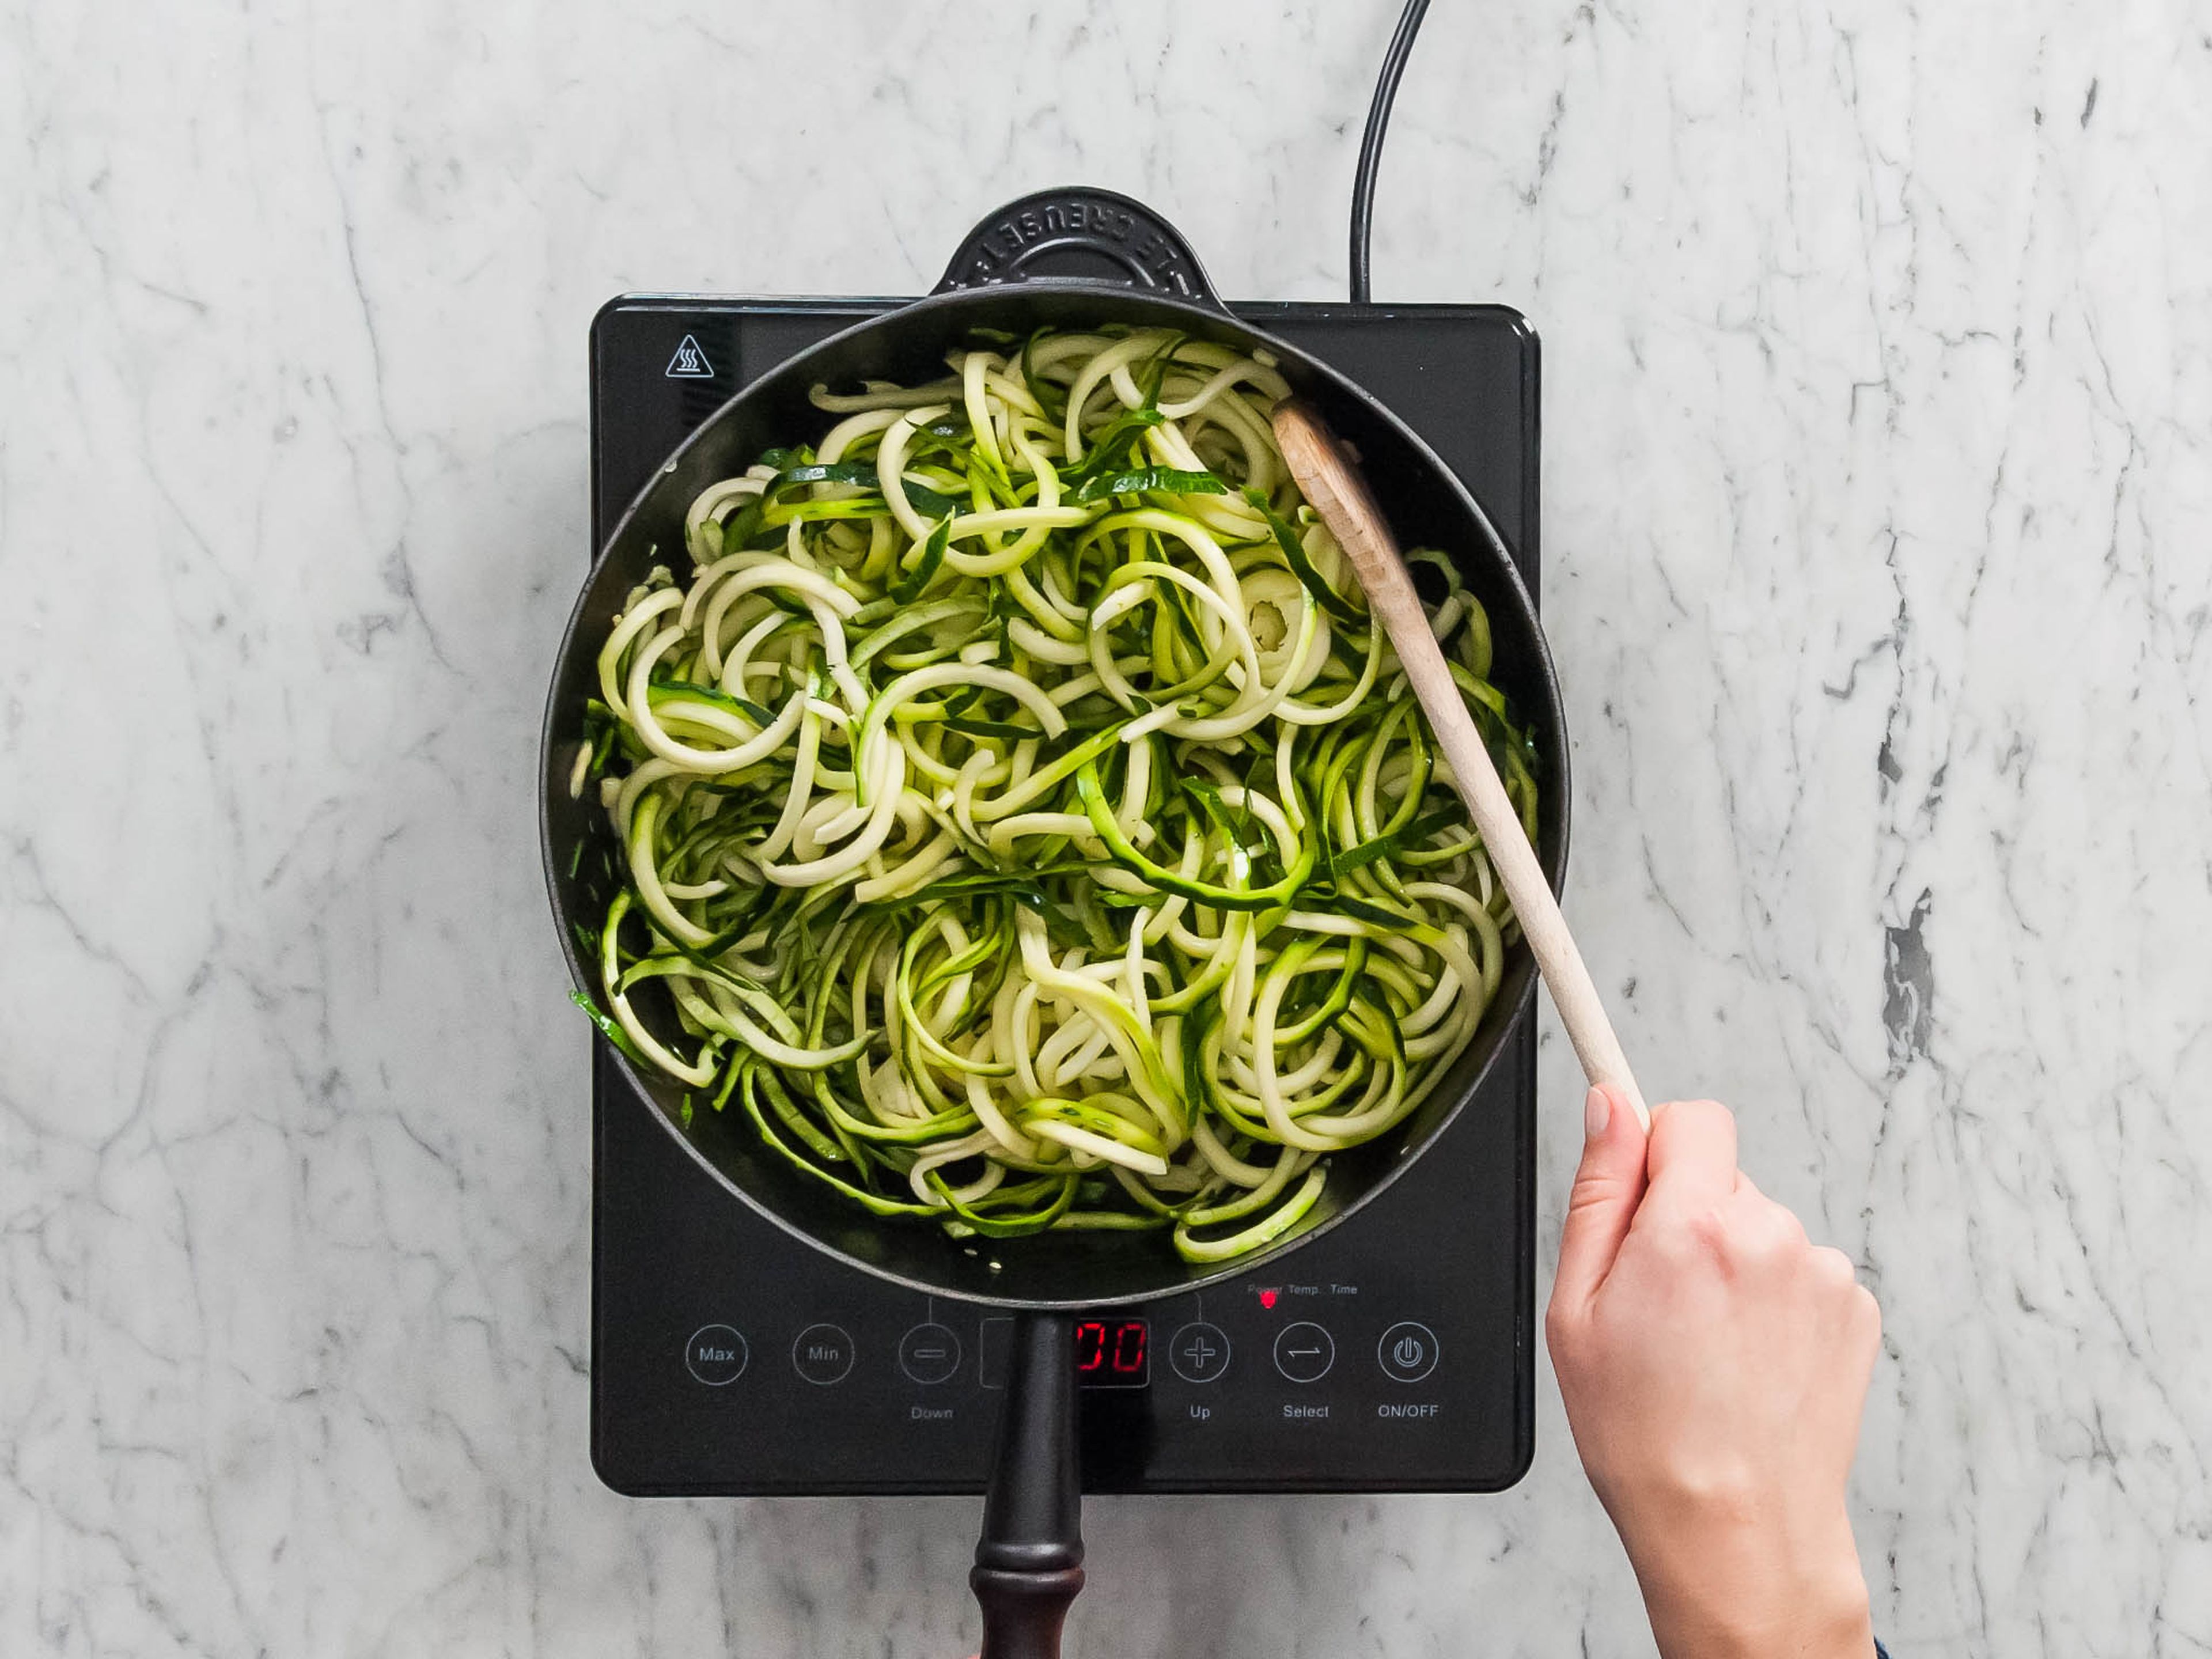 Heat oil in frying pan over medium-high heat; add zucchini and cook, stirring occasionally, for 2 – 3 min., or until softened. Add cauliflower Alfredo sauce and toss gently to coat. Season with salt and pepper if desired. Top with additional cheese and parsley for serving. Enjoy!